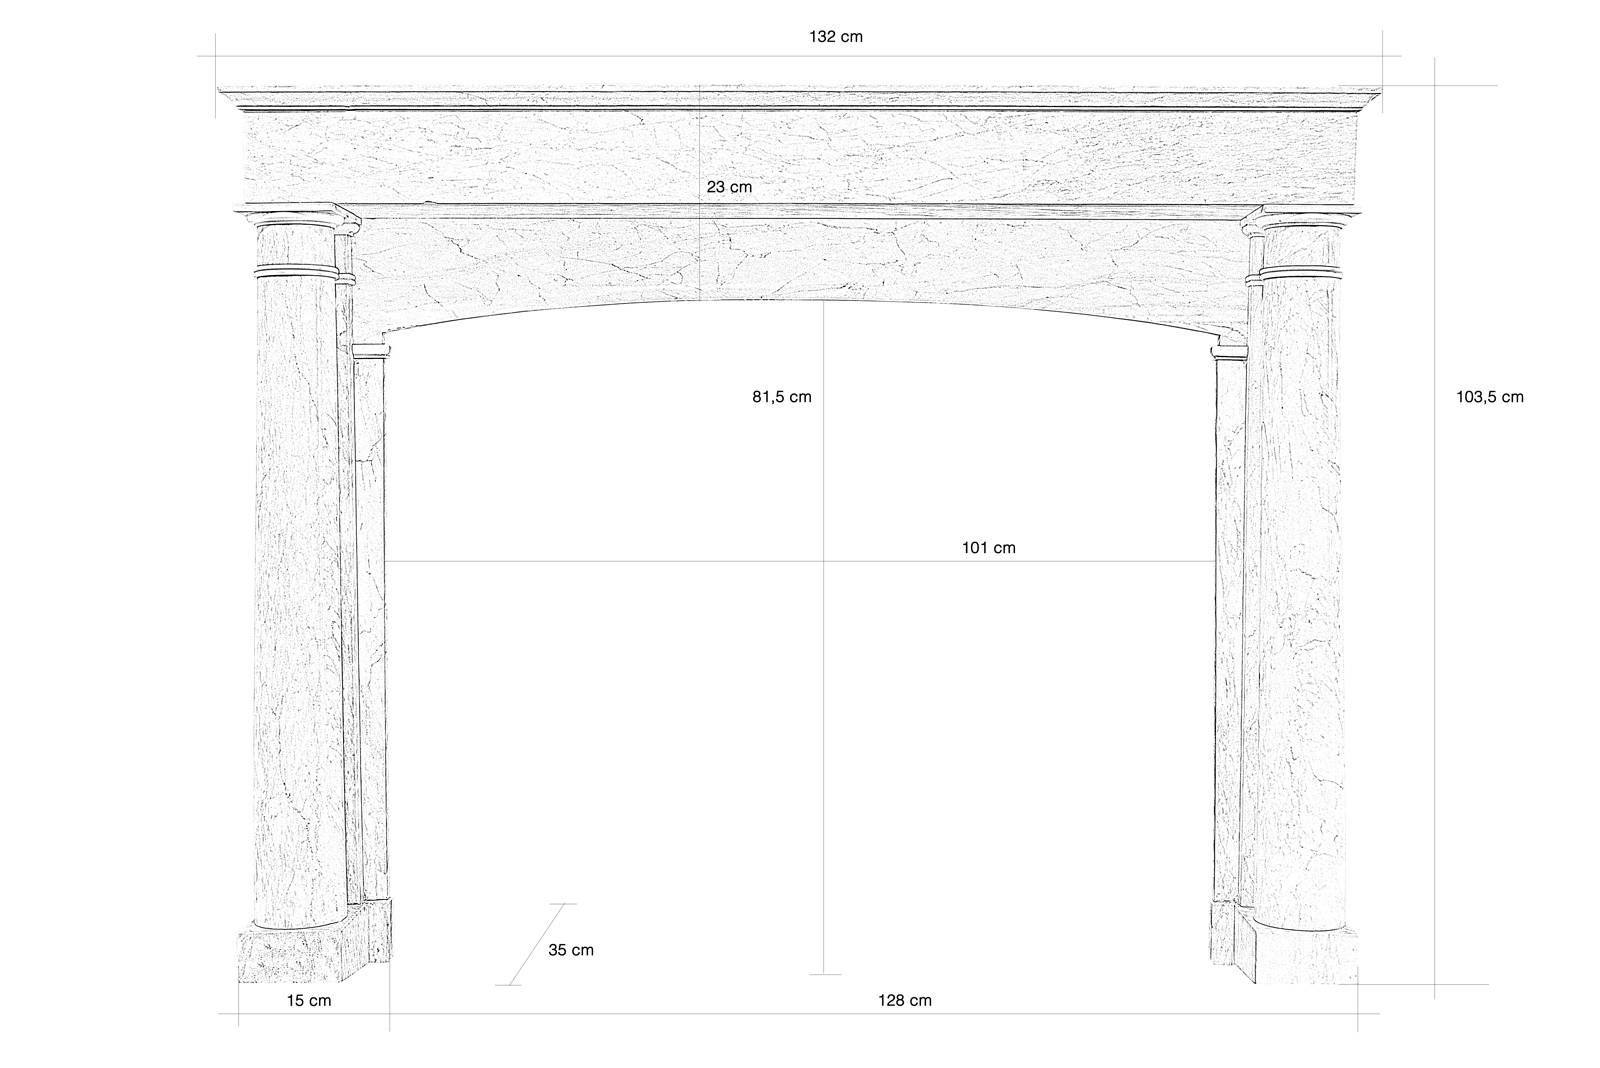 Dated from the 19th century, Empire Turquin blue marble fireplace with two detached columns in front supporting a straight lintel. Delicate incrustations of white marble adorn the columns. Slightly molded tablet. 

Dimensions of the hearth slab: